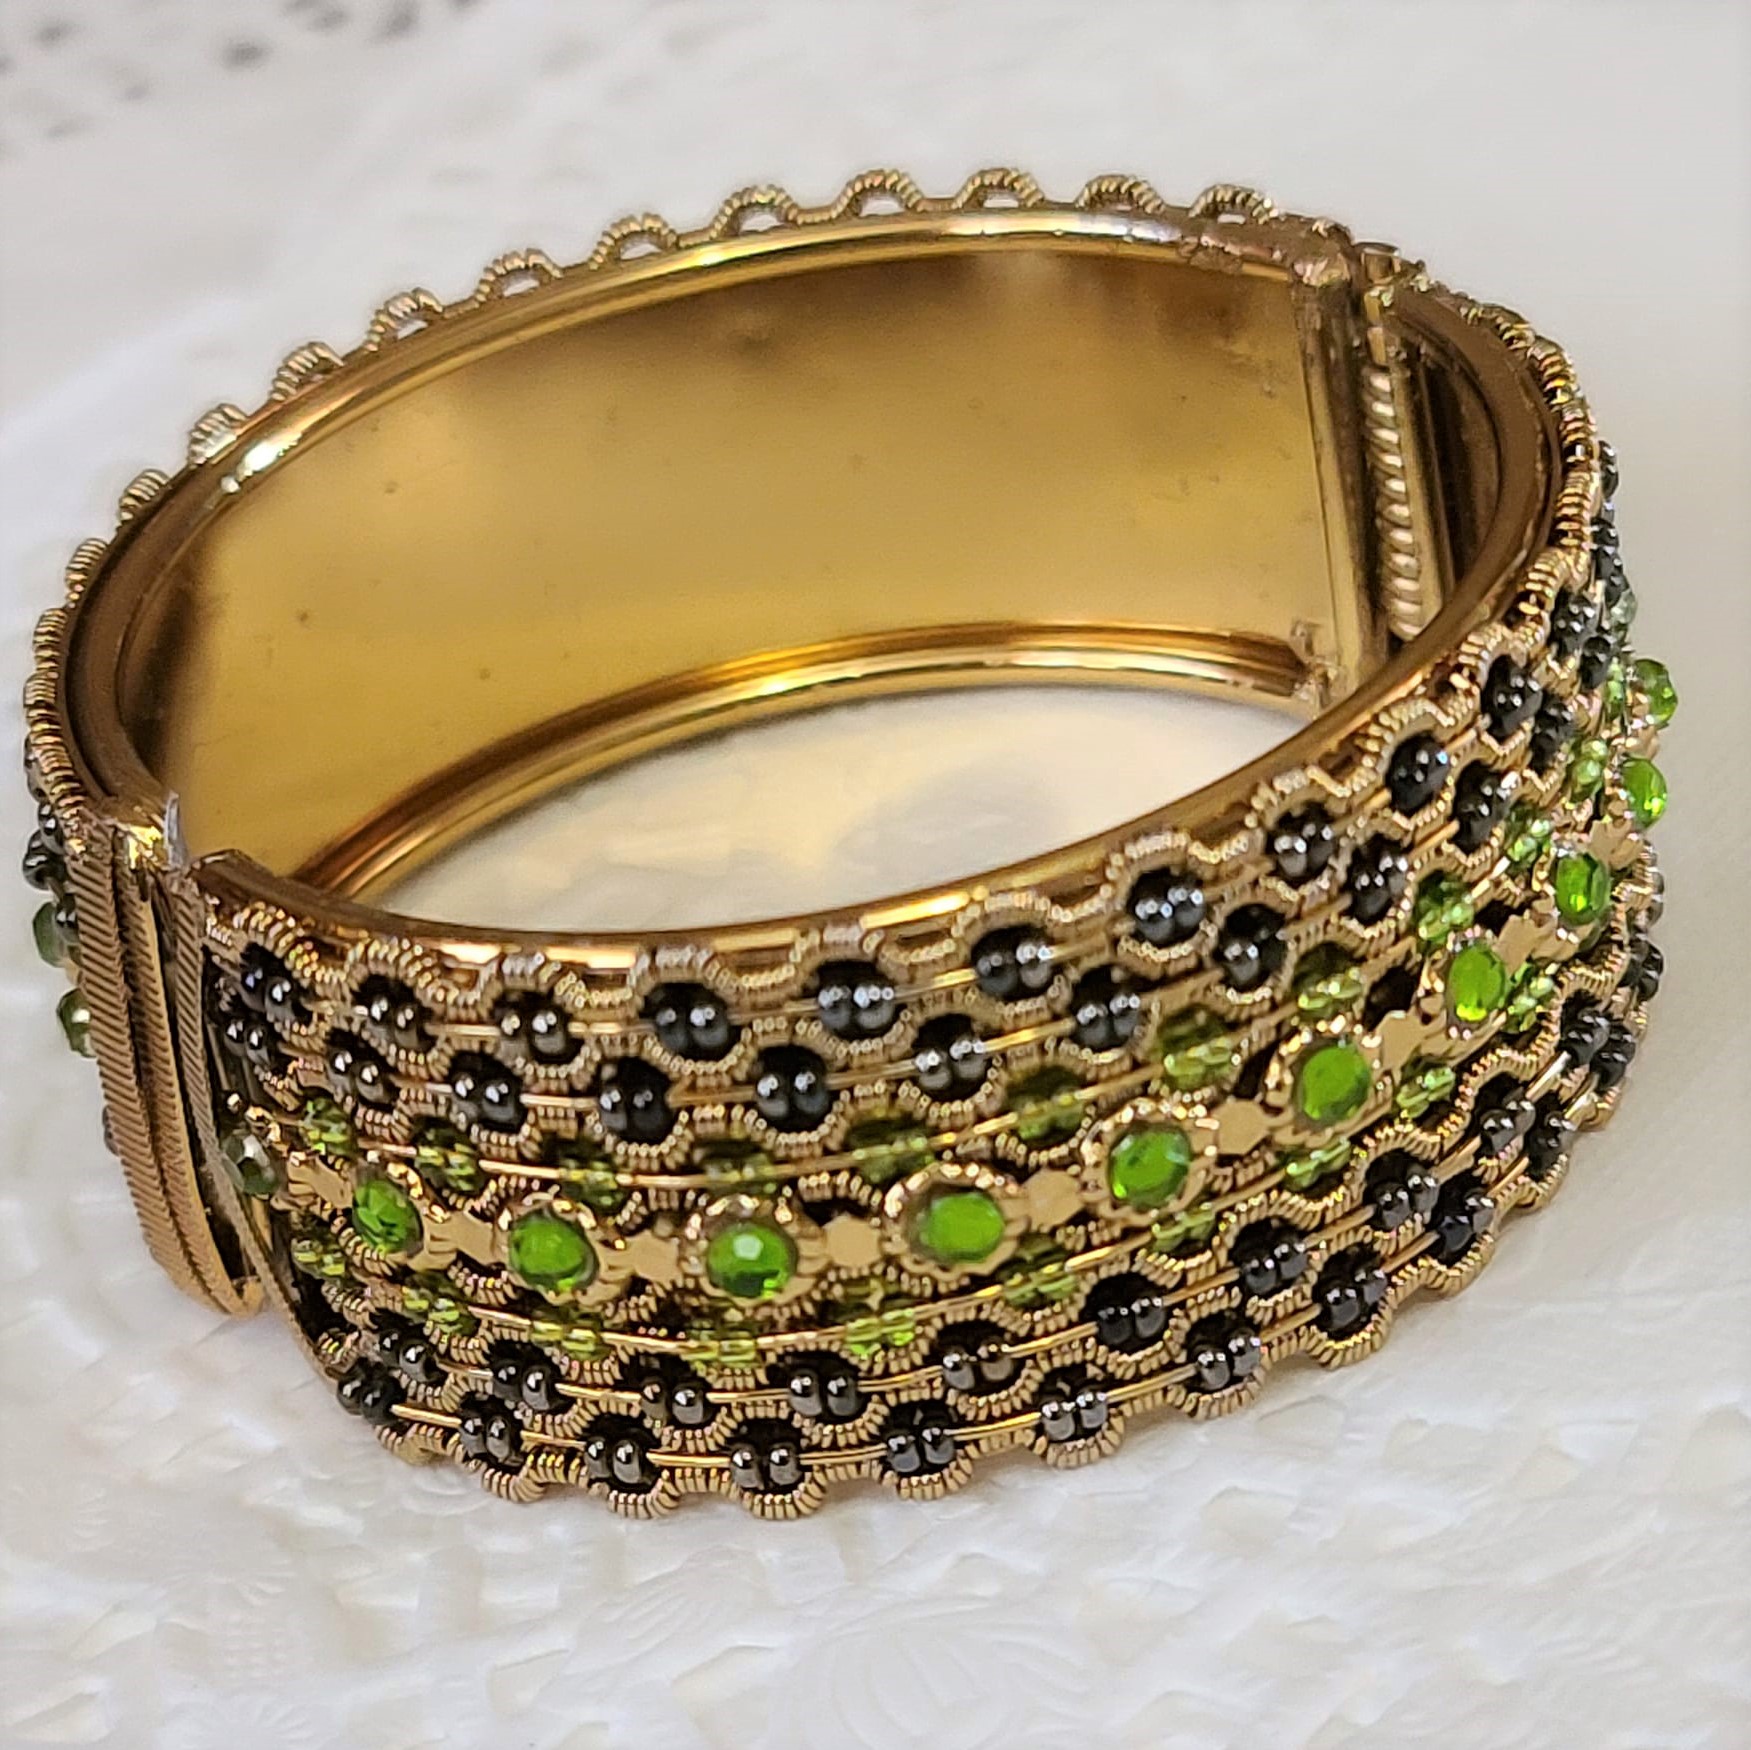 Jewels and Rhinestones Ornate Clamp Style Bracelet - Click Image to Close